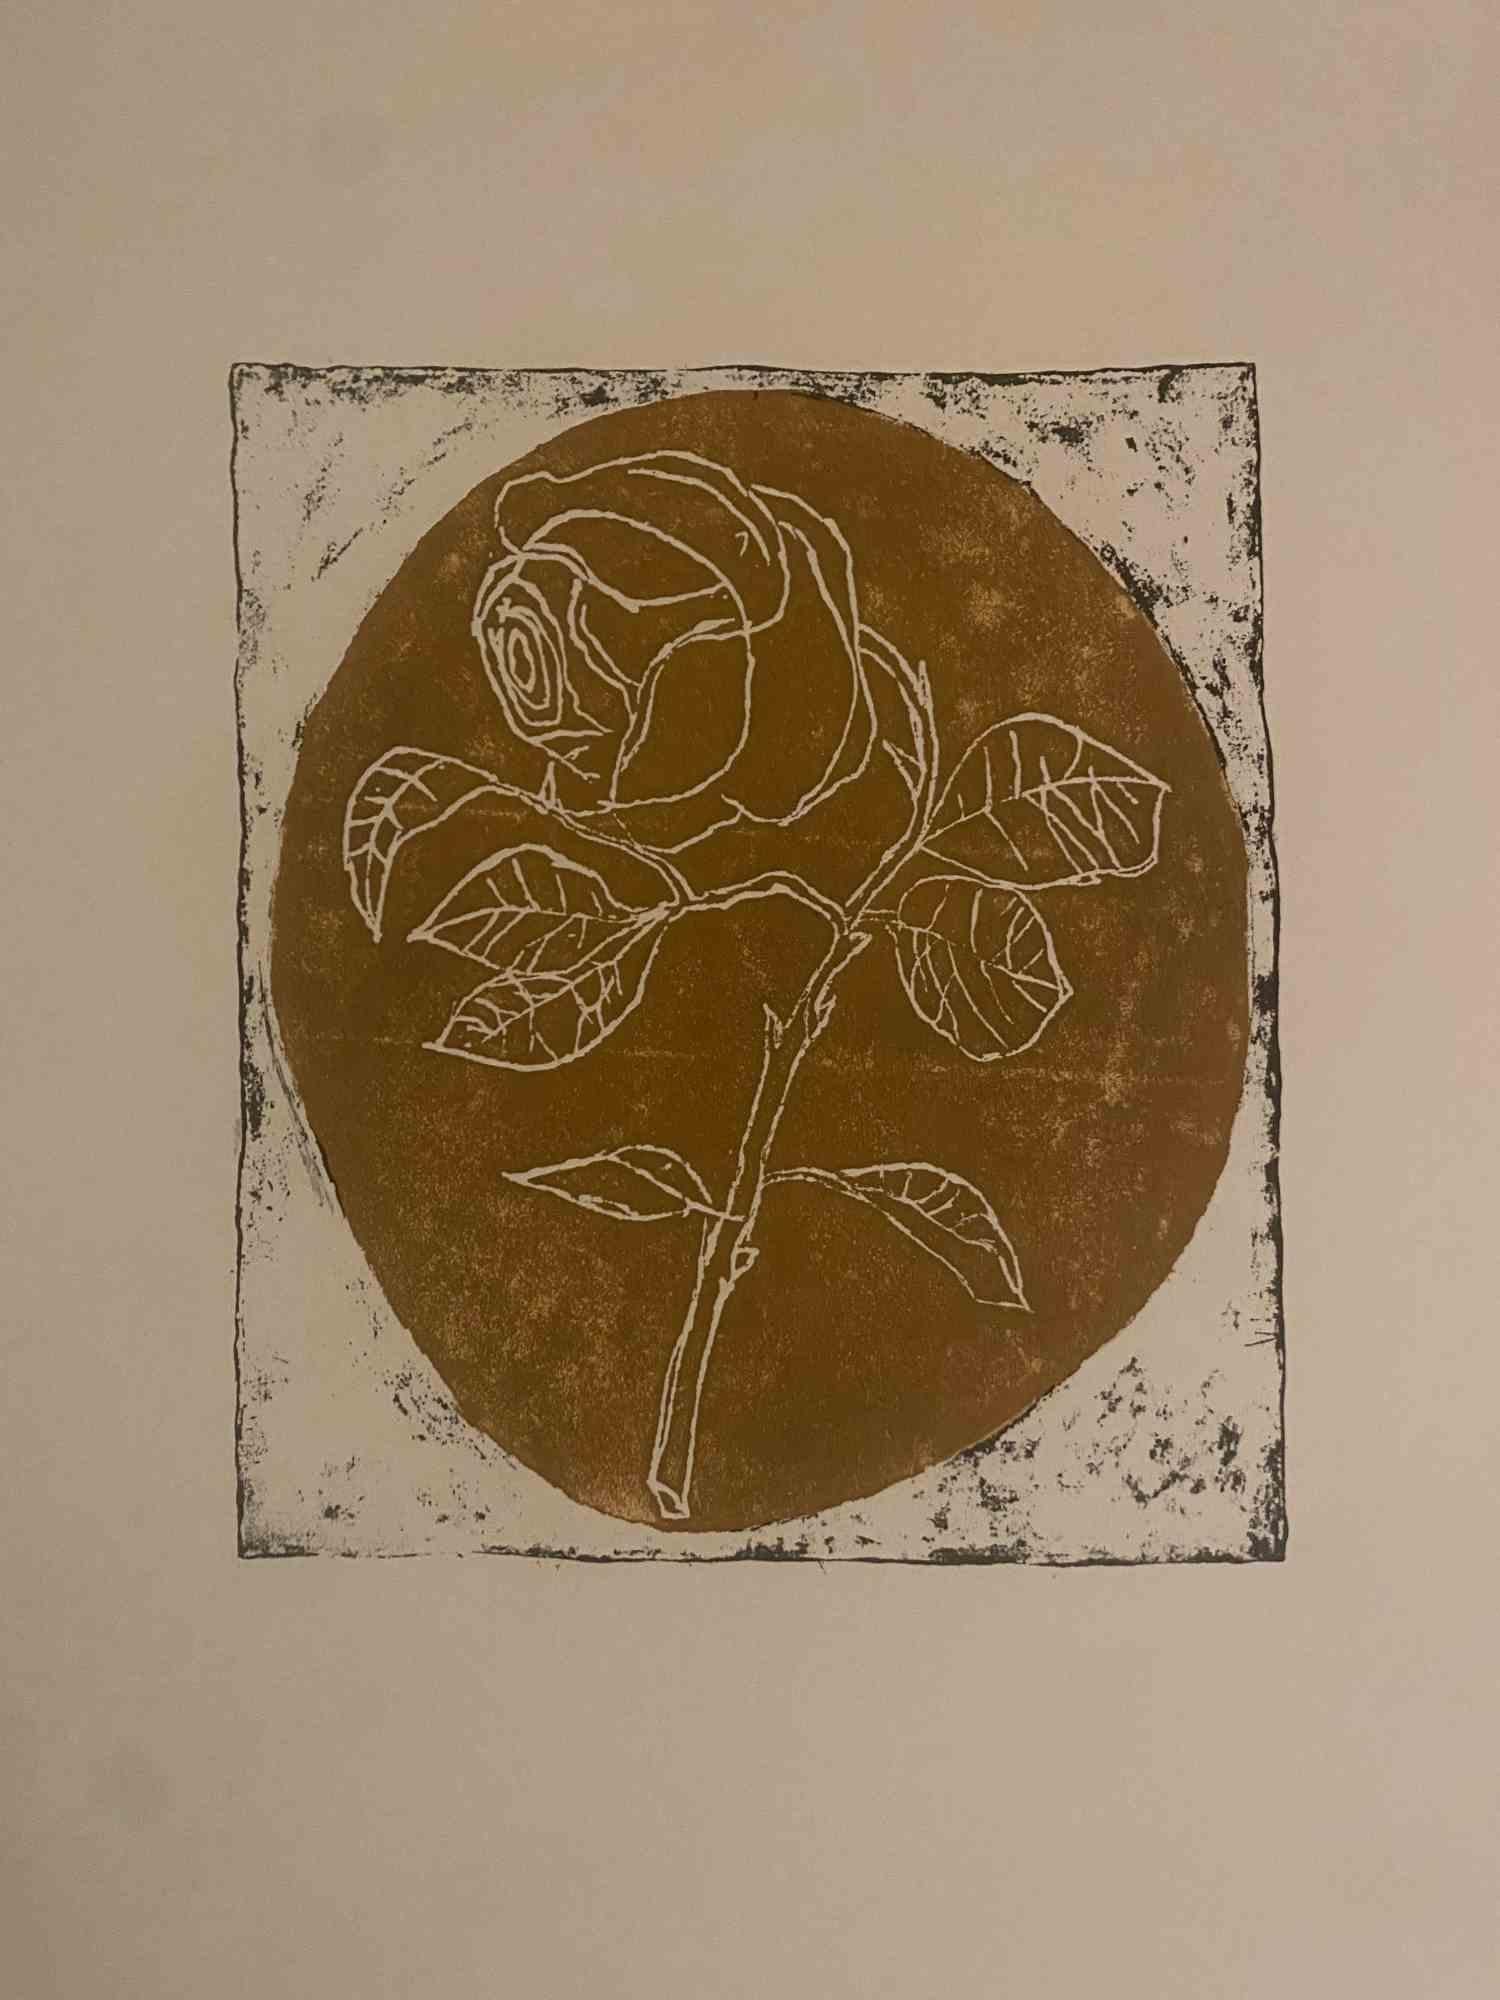 Flower is a Vintage Offset Print on ivory-colored paper, realized by Franco Gentilini (Italian Painter, 1909-1981) in the 1970s.

The state of preservation of the artwork is excellent.

Franco Gentilini (Italian Painter, 1909-1981): Gentilini's